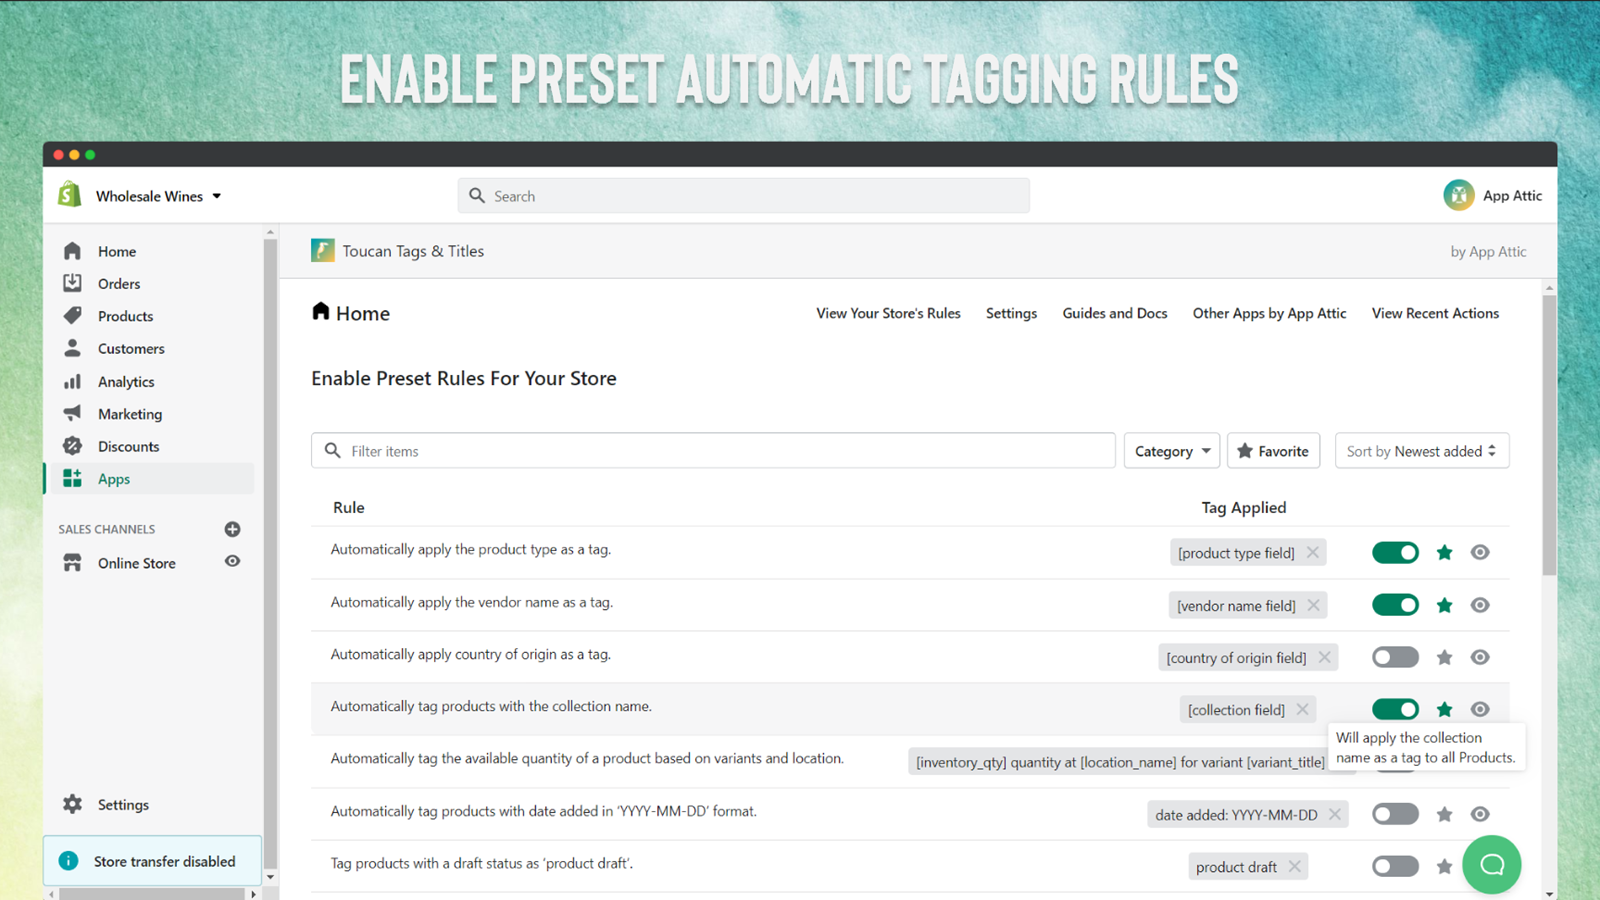 Enable Preset Automatic Tagging Rules